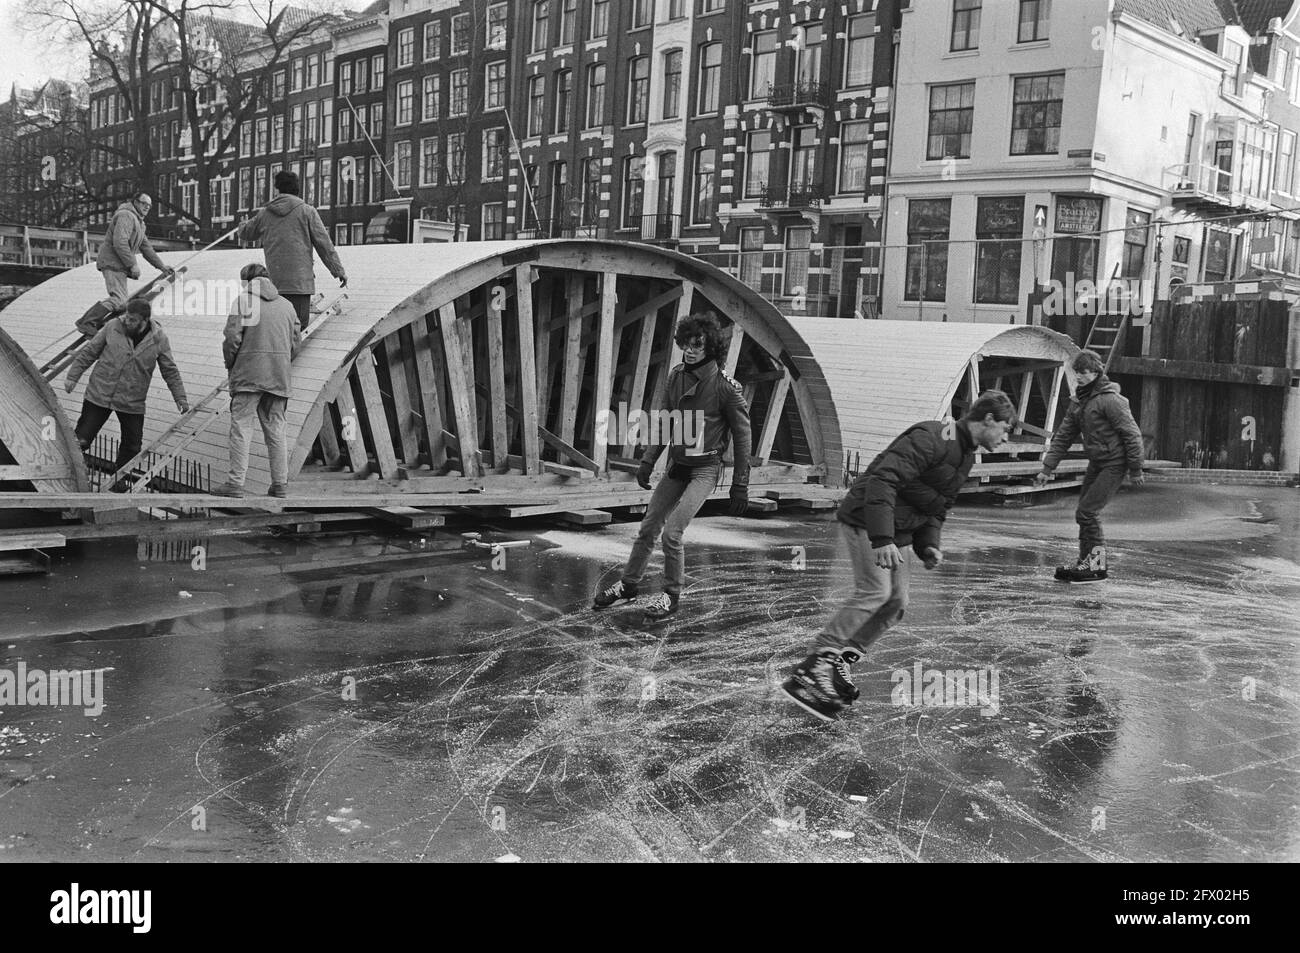 Skaters on canal intersection Keizersgracht/Leliegracht where an Amsterdam high bridge is being restored, 15 January 1982, GRACKS, skaters, The Netherlands, 20th century press agency photo, news to remember, documentary, historic photography 1945-1990, visual stories, human history of the Twentieth Century, capturing moments in time Stock Photo